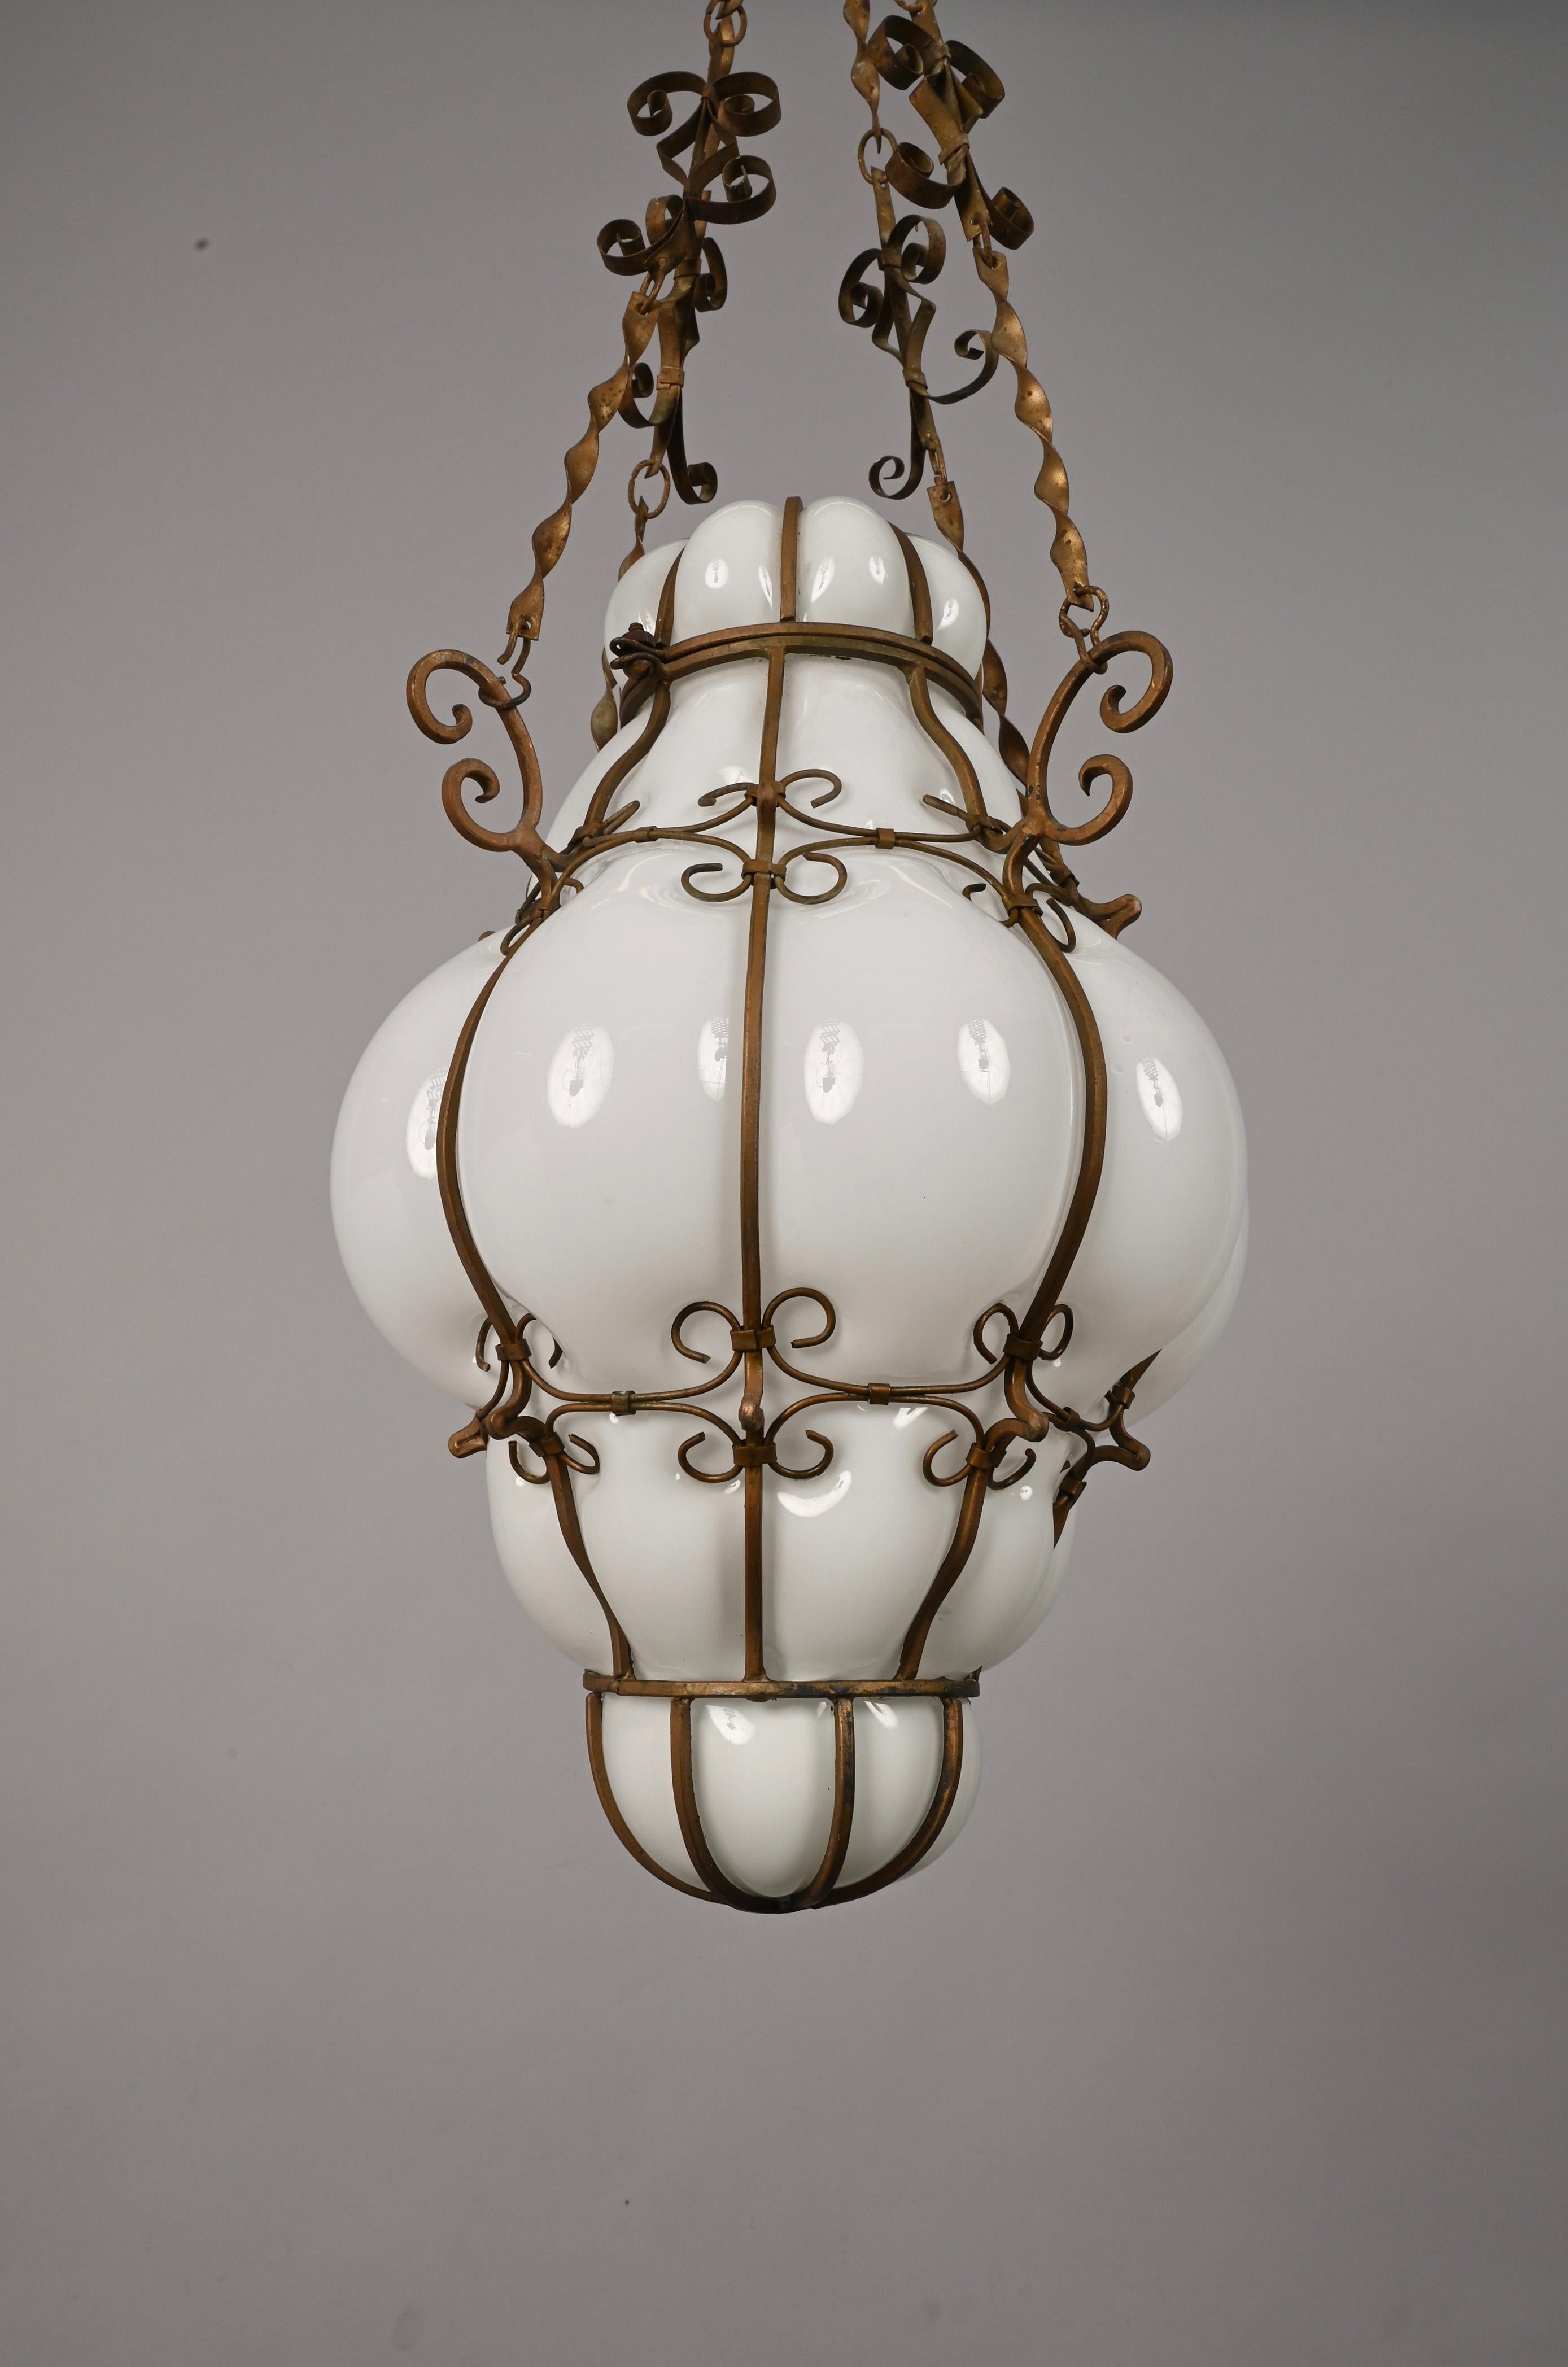 Incredible midcentury Venetian Murano white glass chandelier with an astonishing golden wrought iron frame. This outstanding piece was designed in Italy during the 1940s.

This chandelier is incredible because of the accuracy in the decoration of